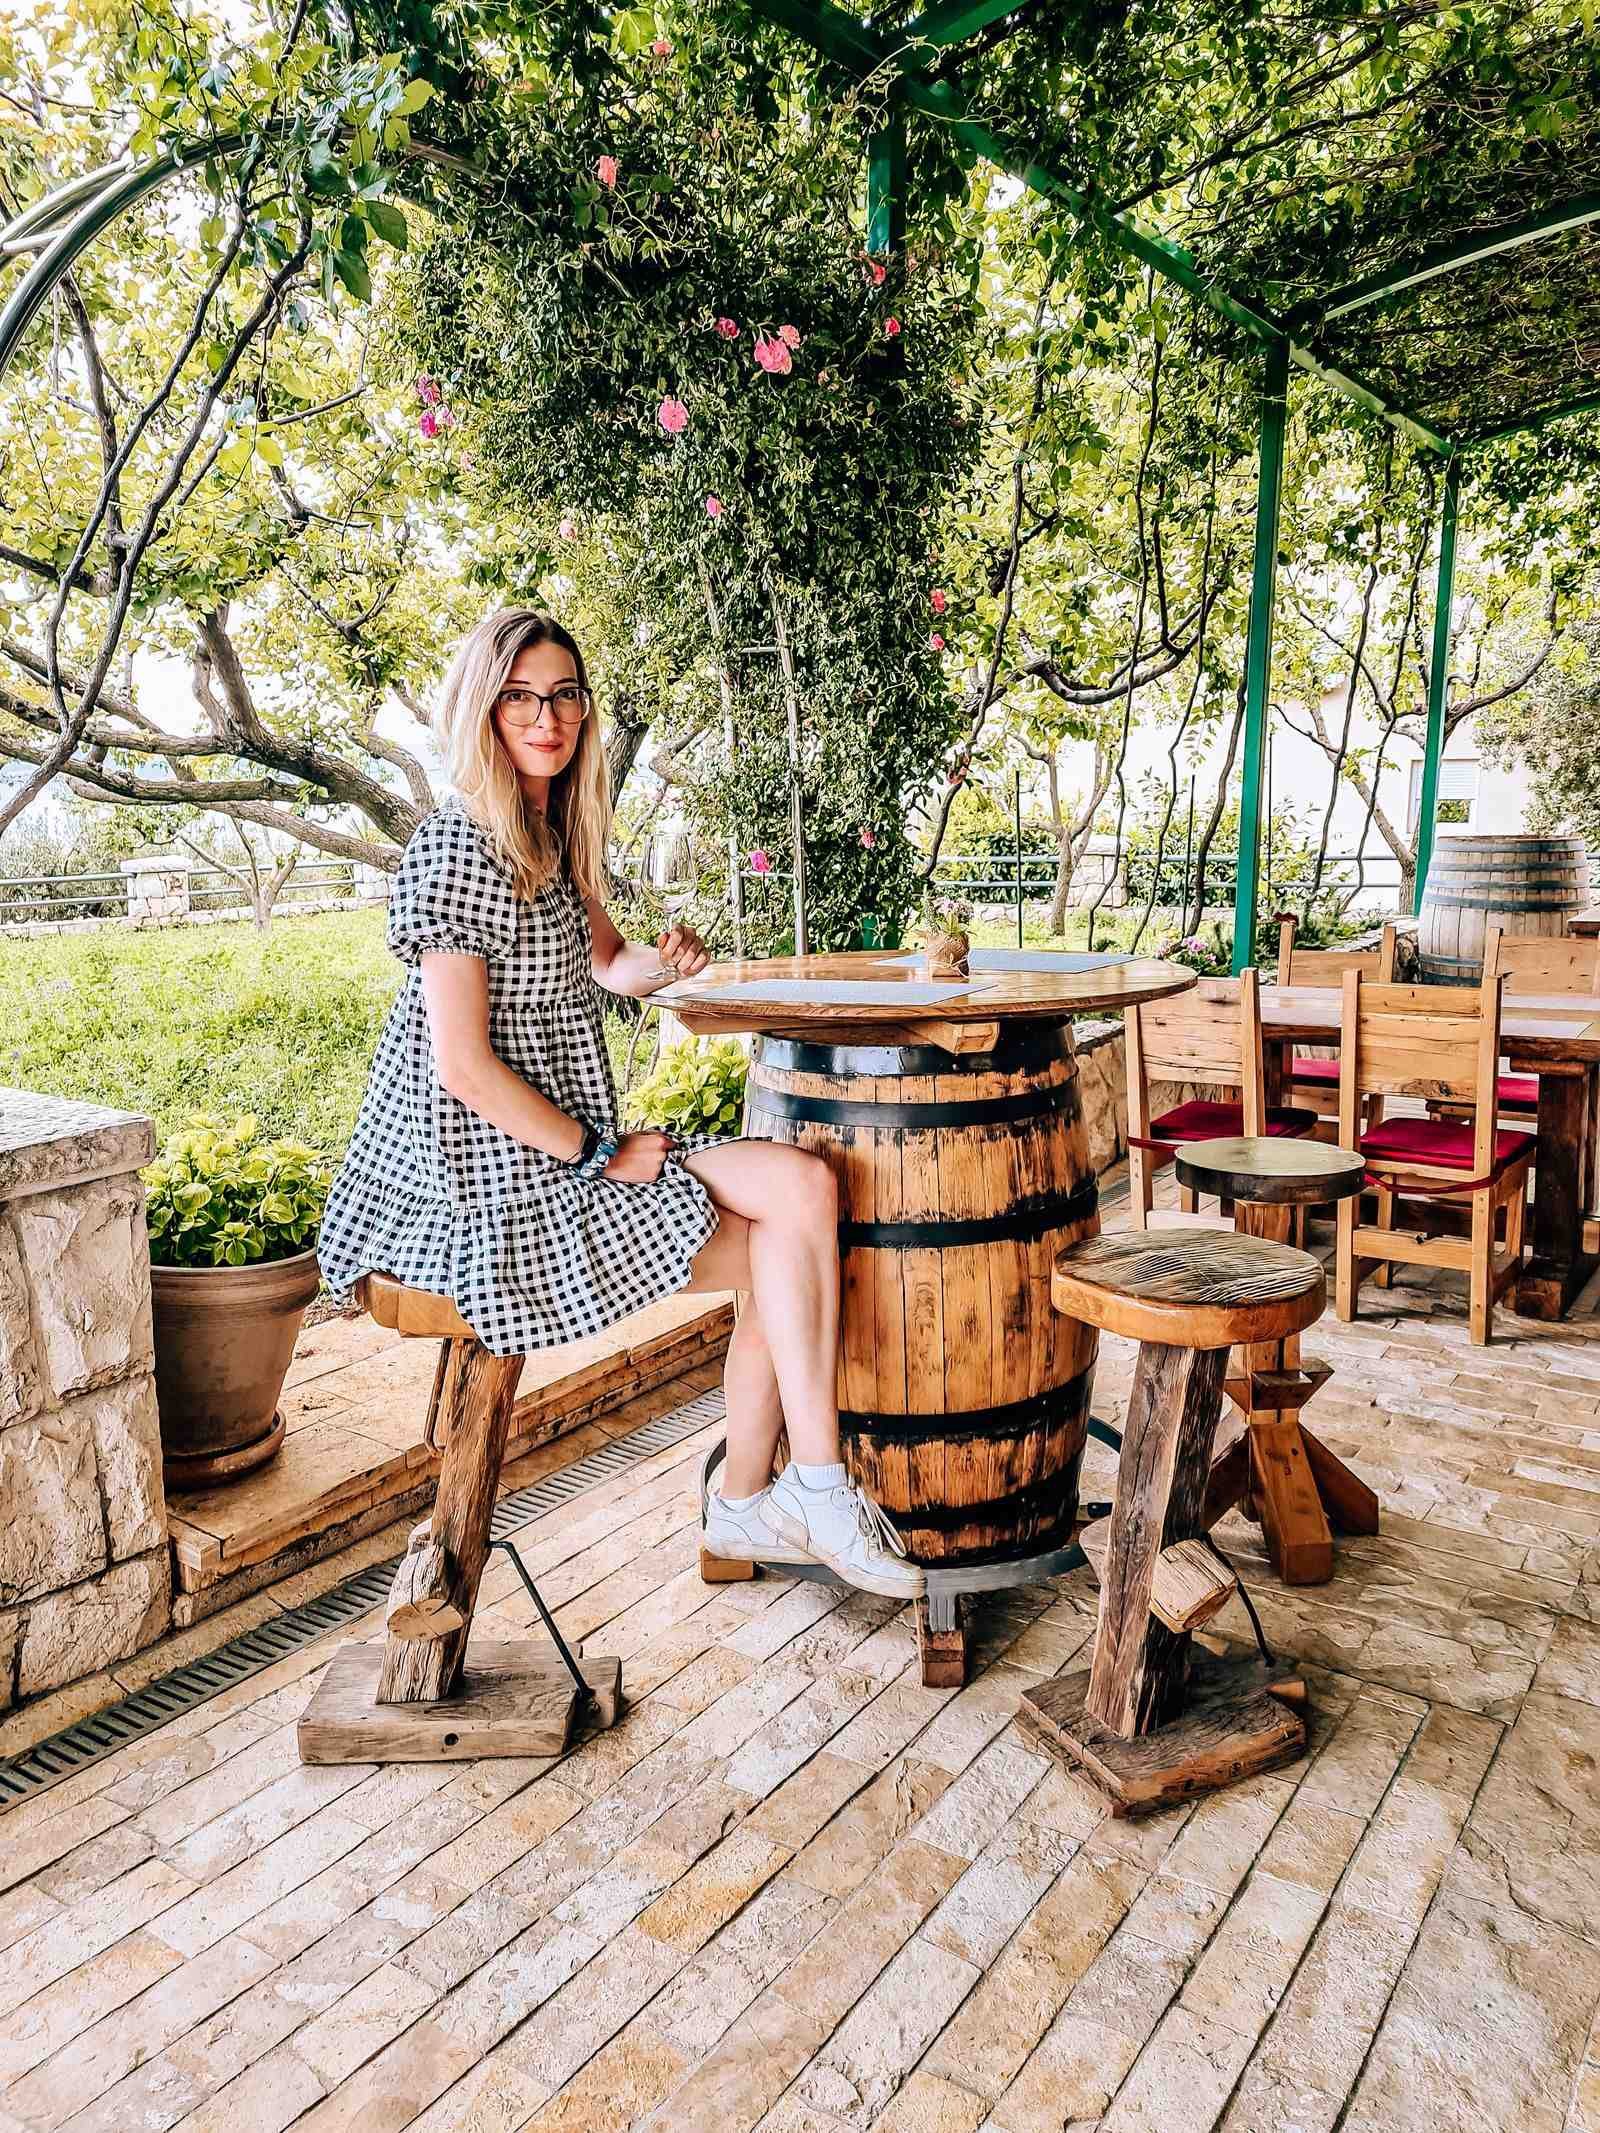 Girl sitting on a wooden stool in a black and white checked dress leaning on a wooden barrel table and holding a glass of wine. There is green vines tumbling on the terrace behind her